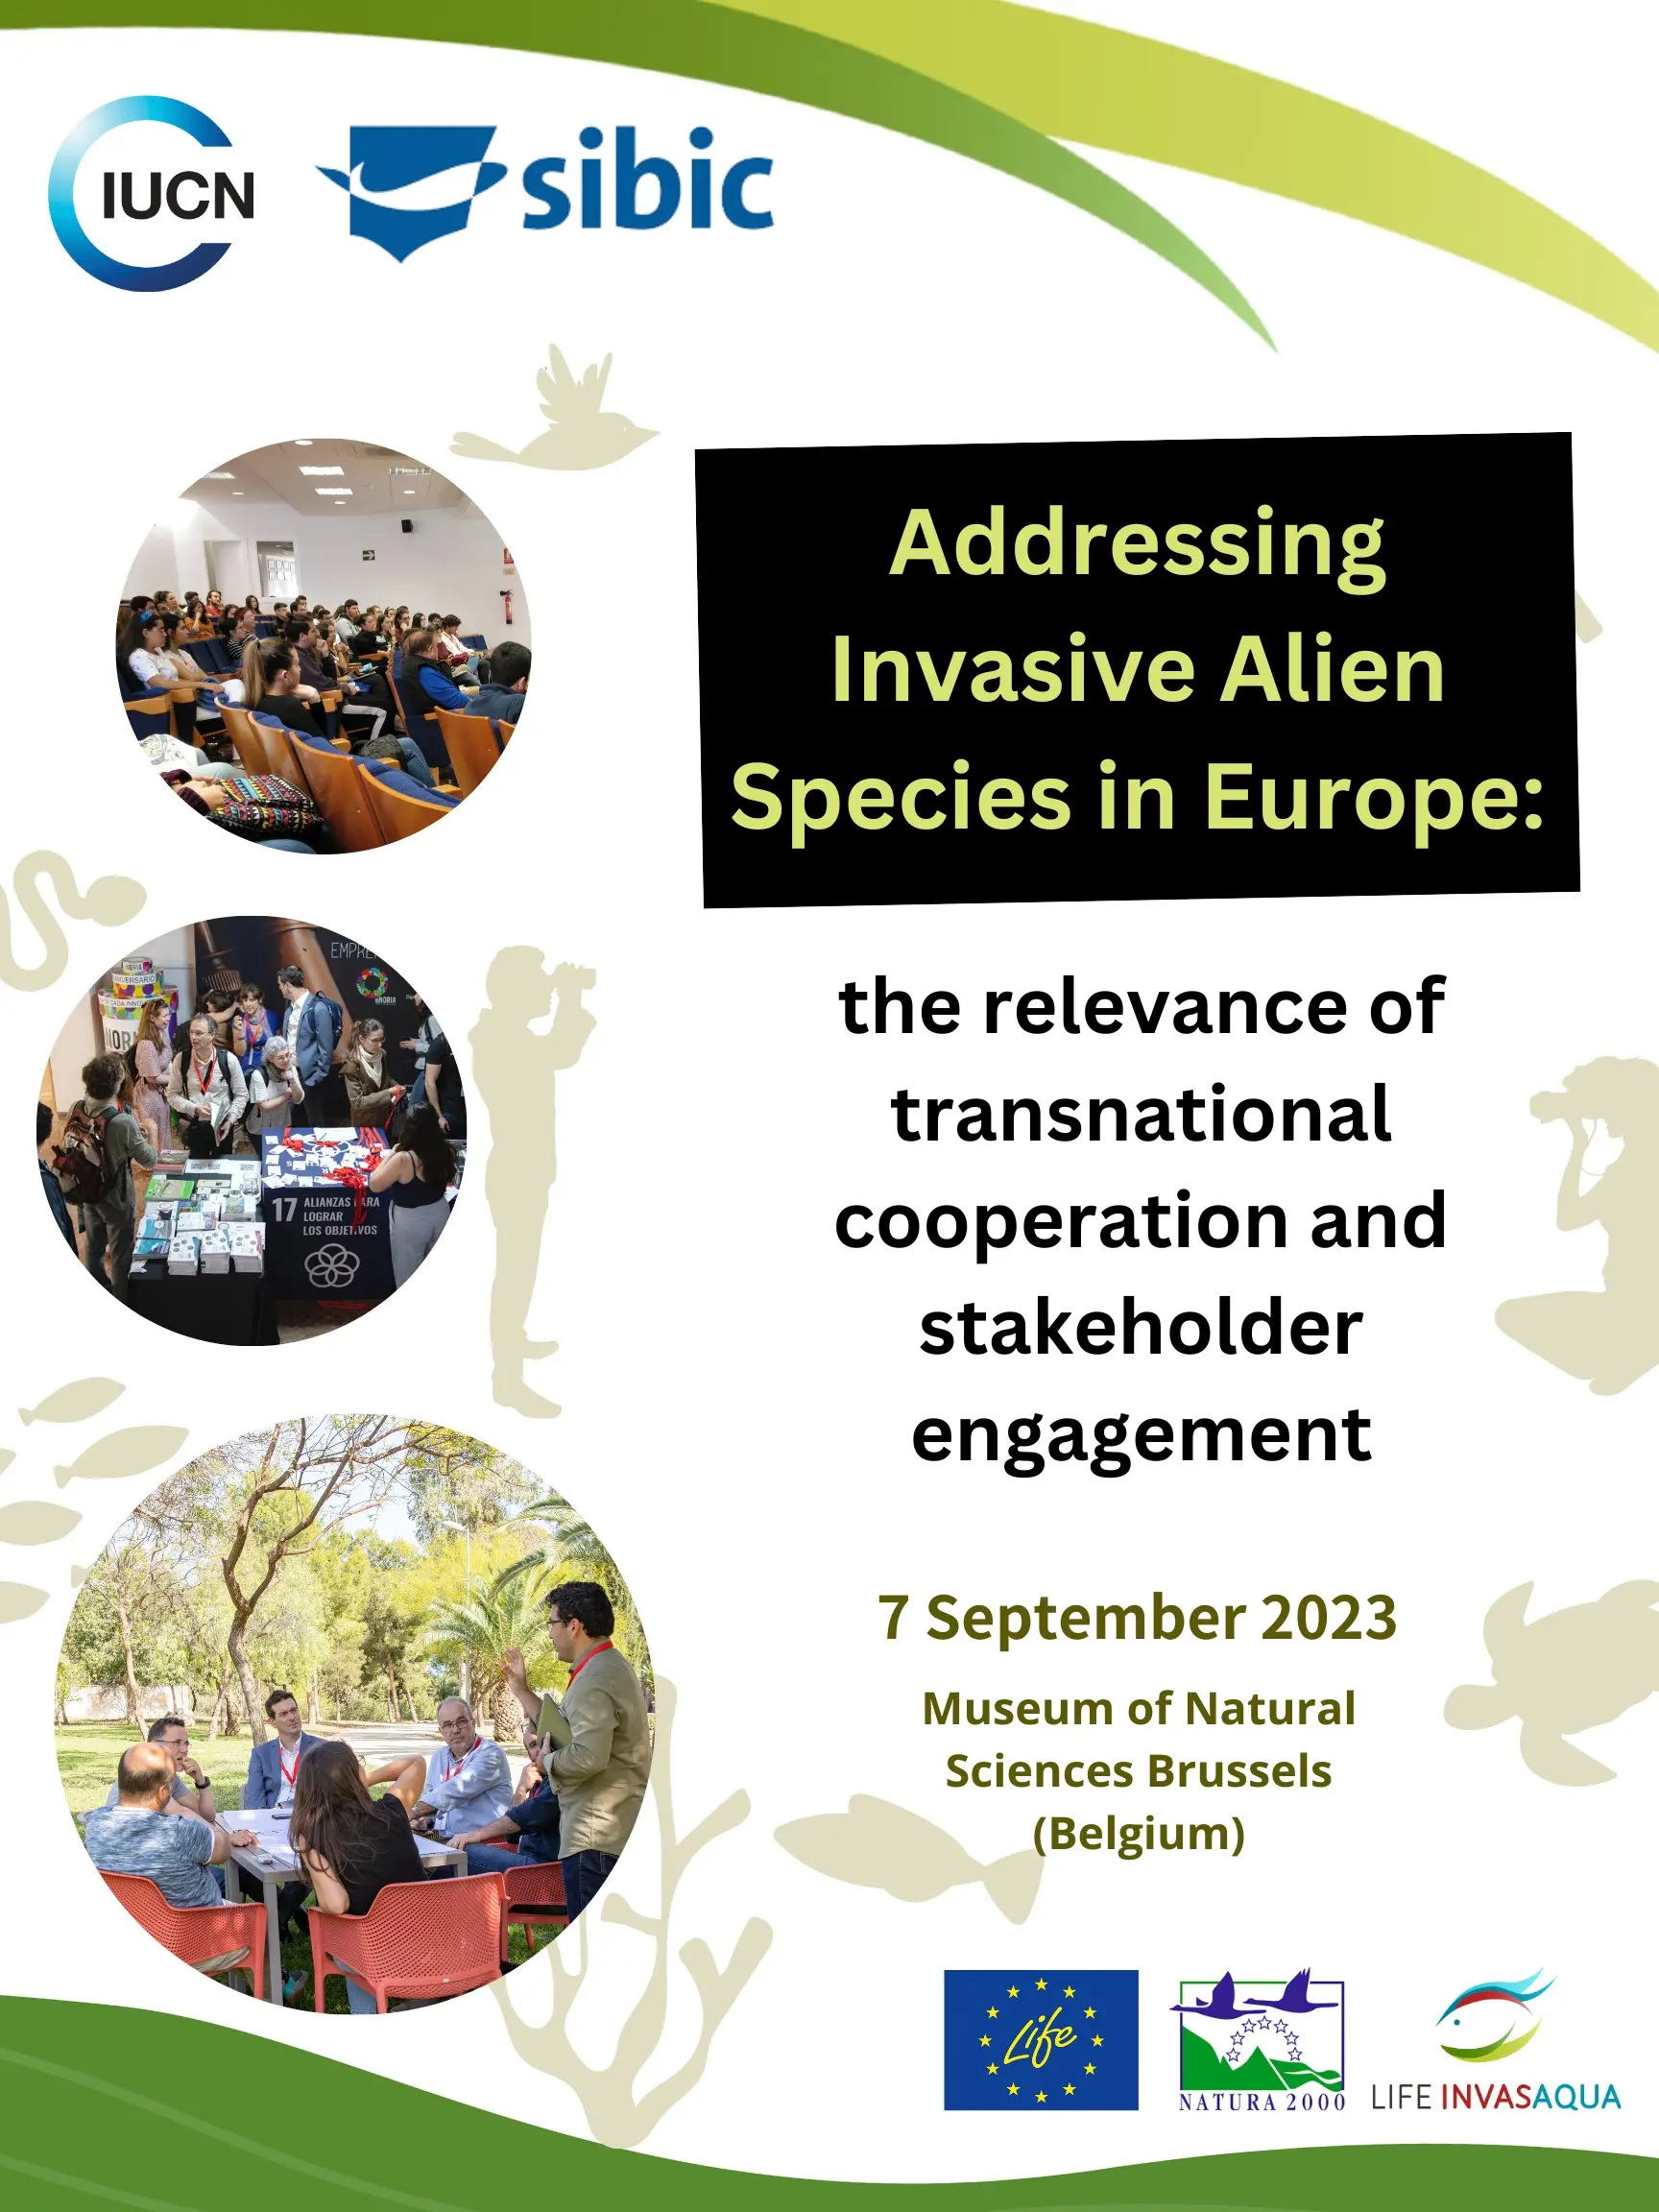 Cover of the program for the Invasaqua Brussels event